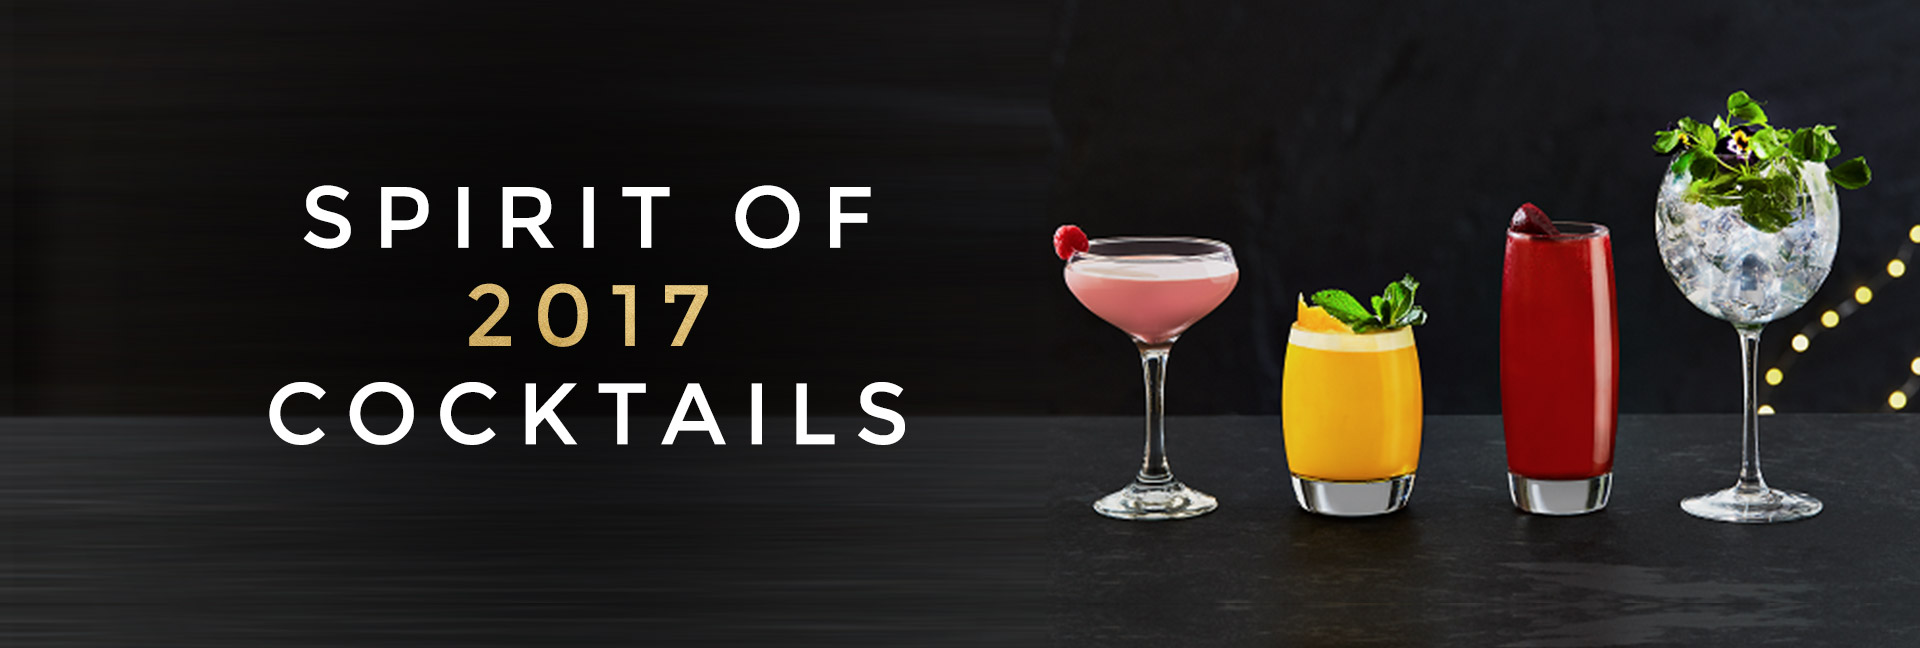 Spirit of 2017 cocktails at All Bar One Cambridge